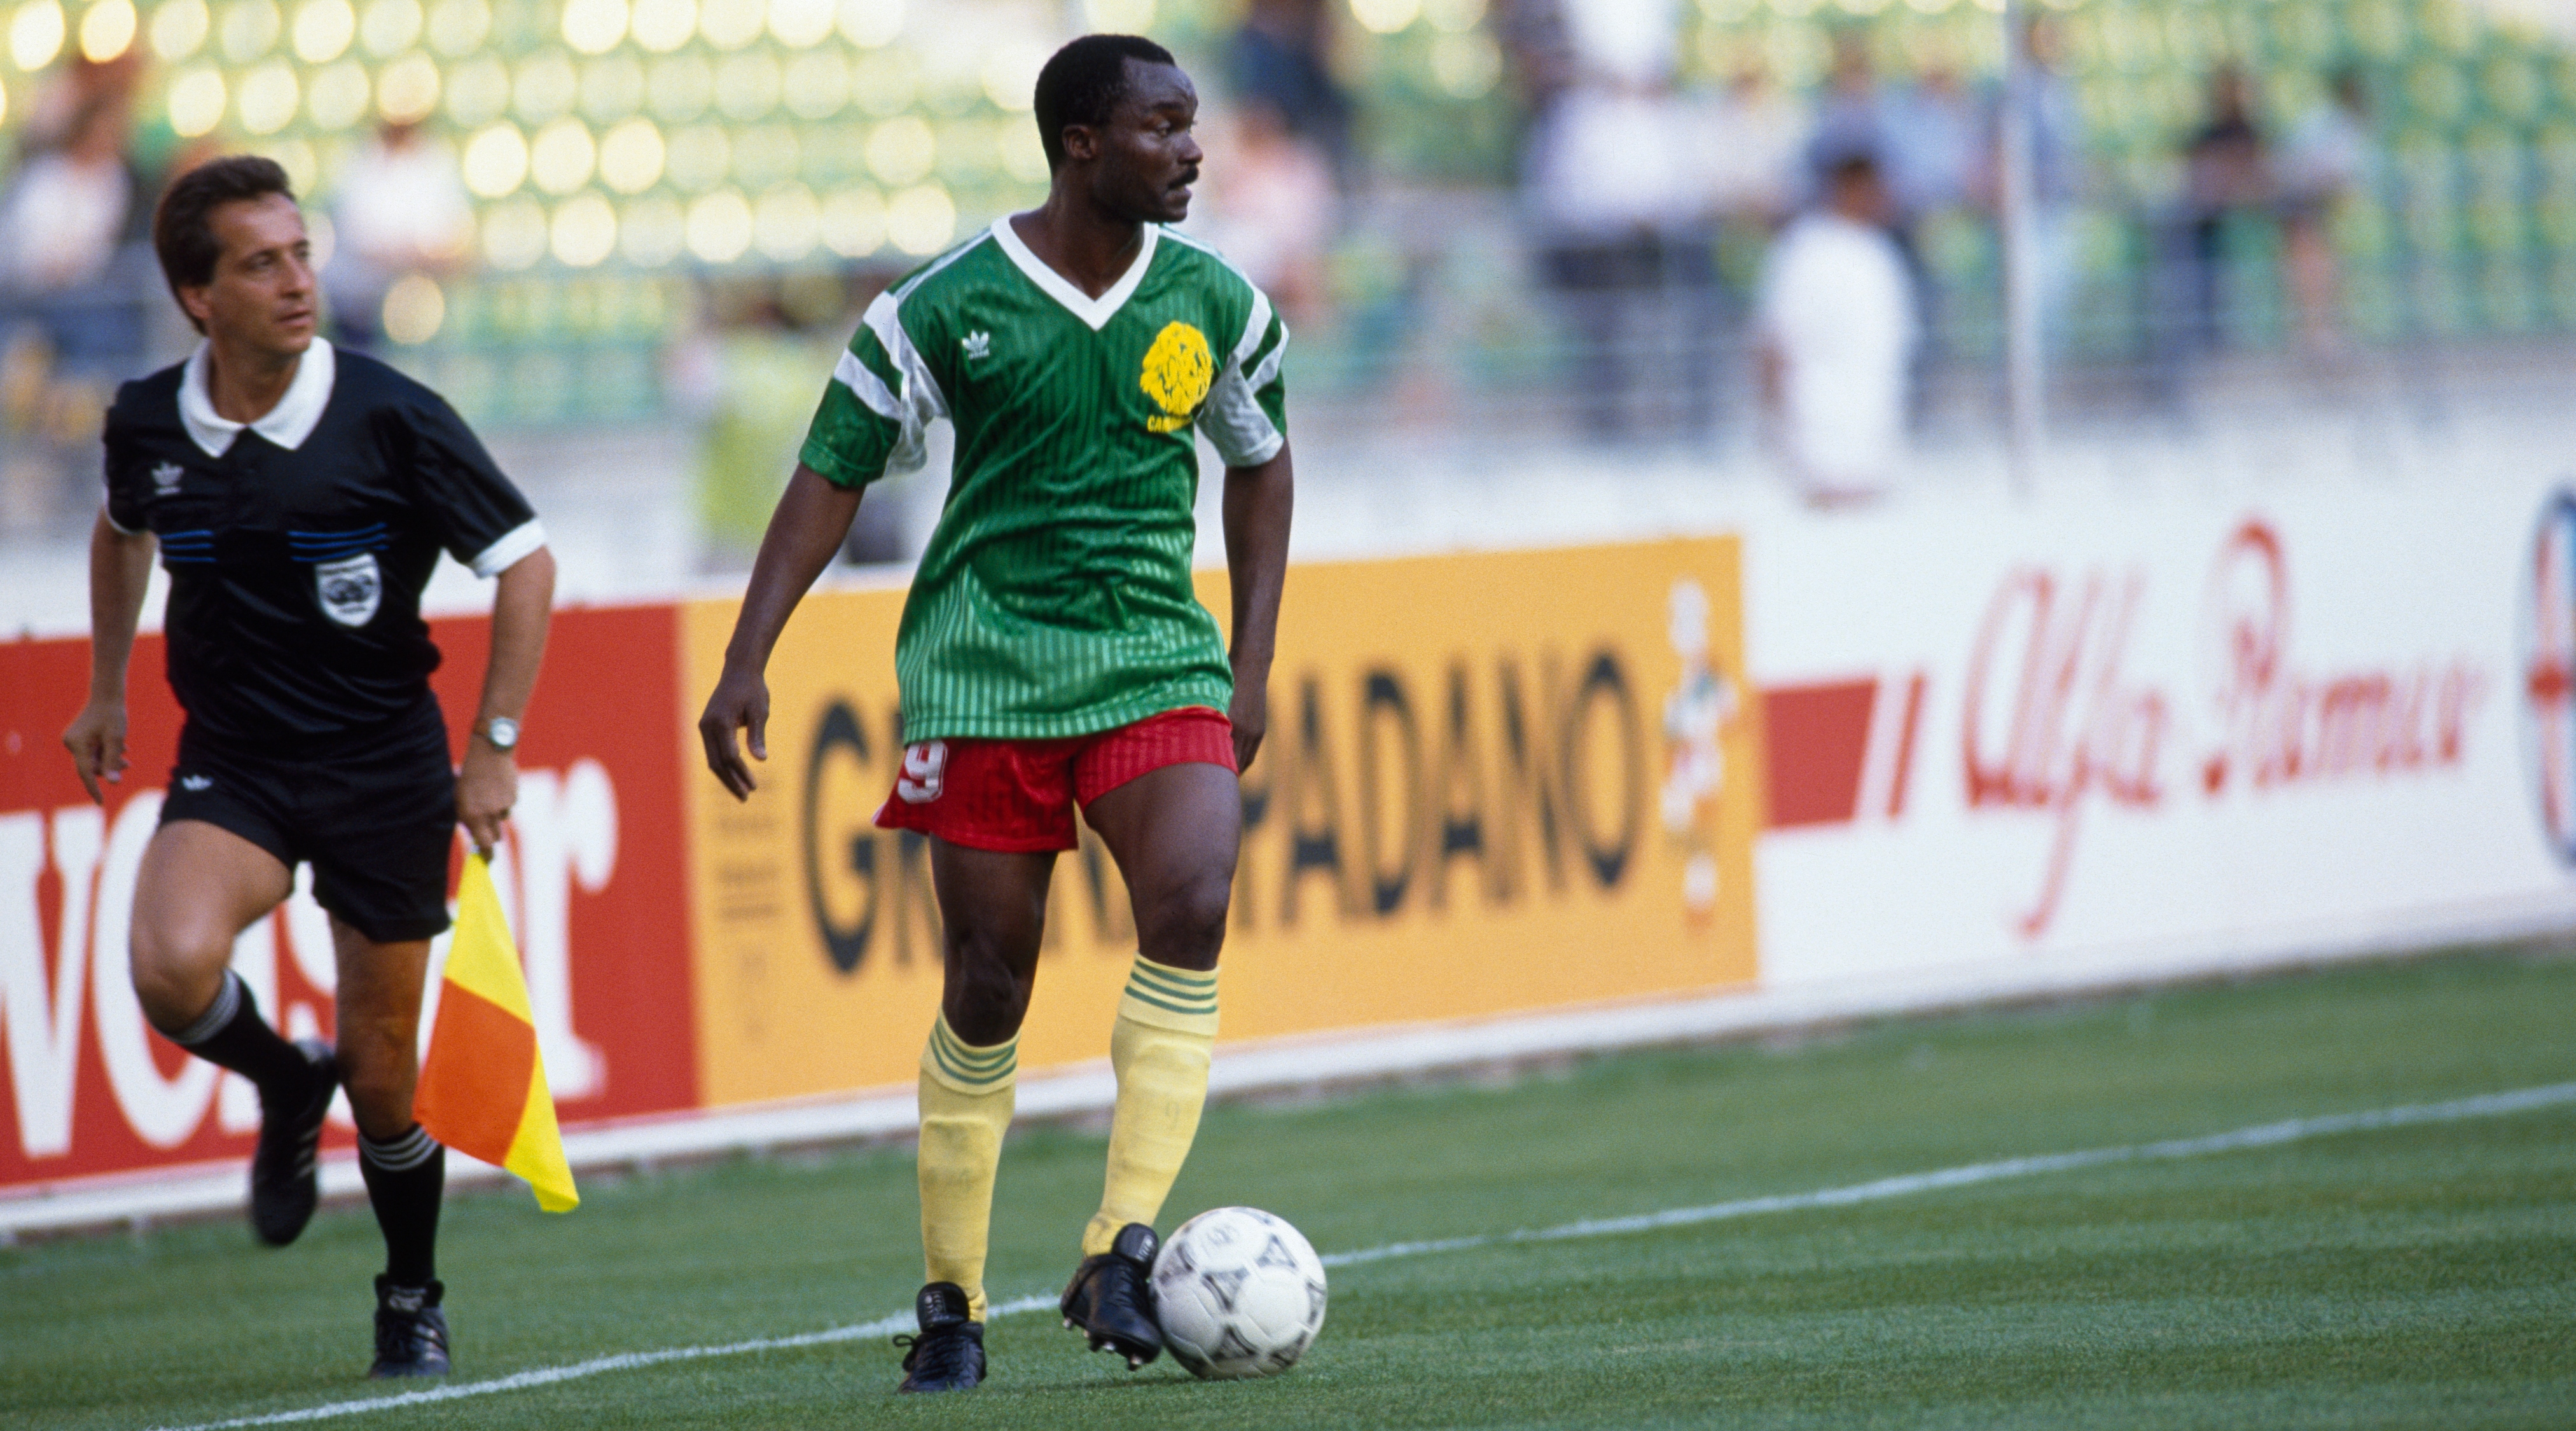 Roger Milla of Cameroon in action during a first round match of the 1990 FIFA World Cup against Romania. Cameroon won 2-1. (Photo by RENARD eric/Corbis via Getty Images)